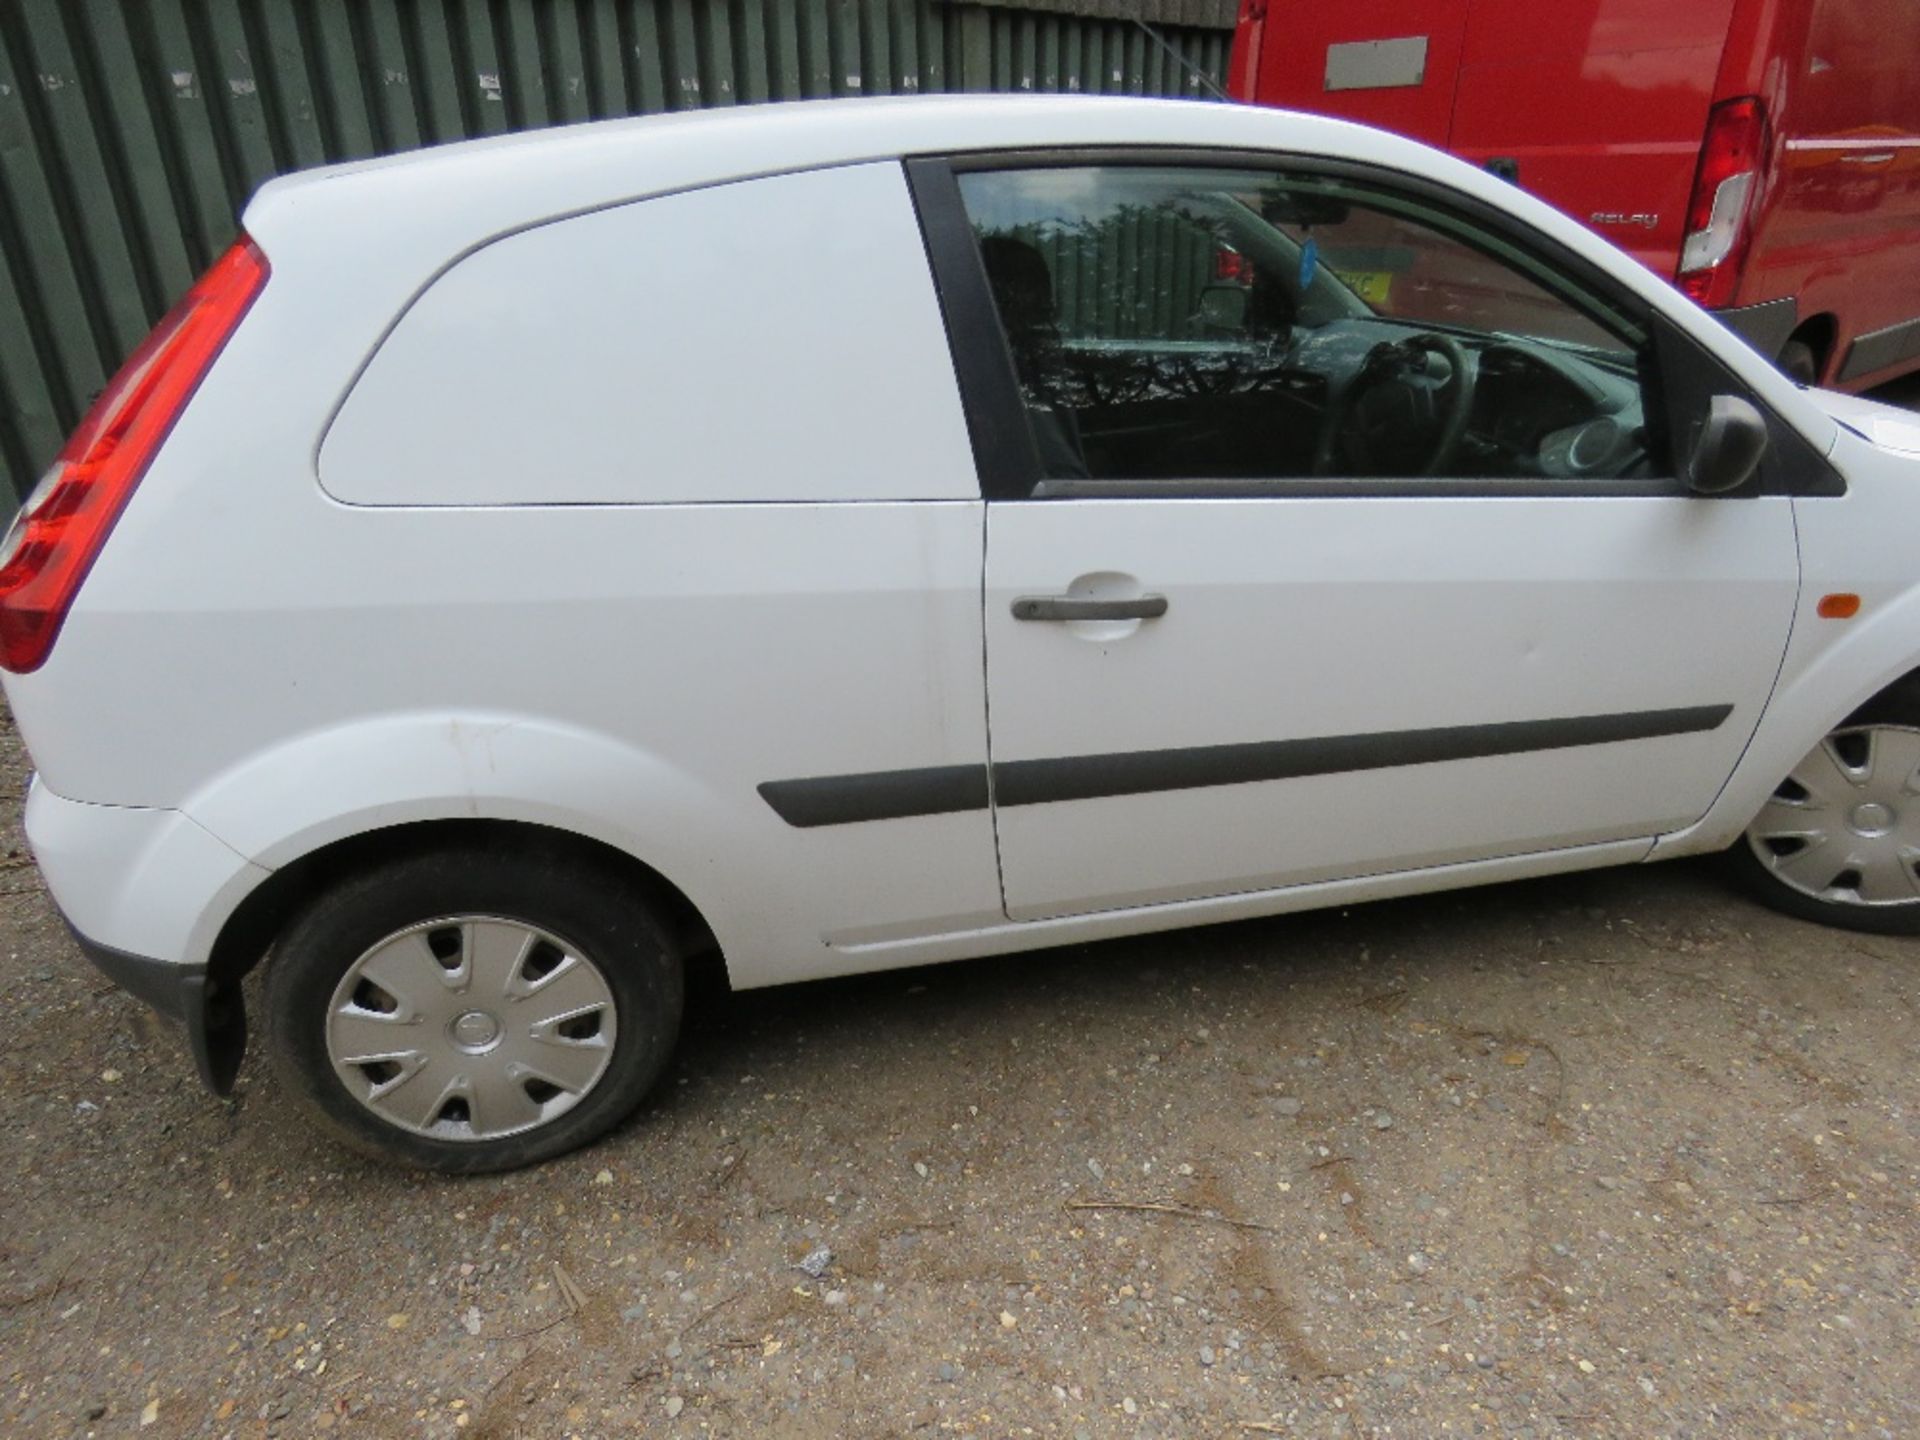 FORD FIESTA PANEL VAN REG: AV09 ZGP TESTED TILL 05/08/19, DIRECT FROM LOCAL COMPANY AS PART OF THEIR - Image 2 of 6